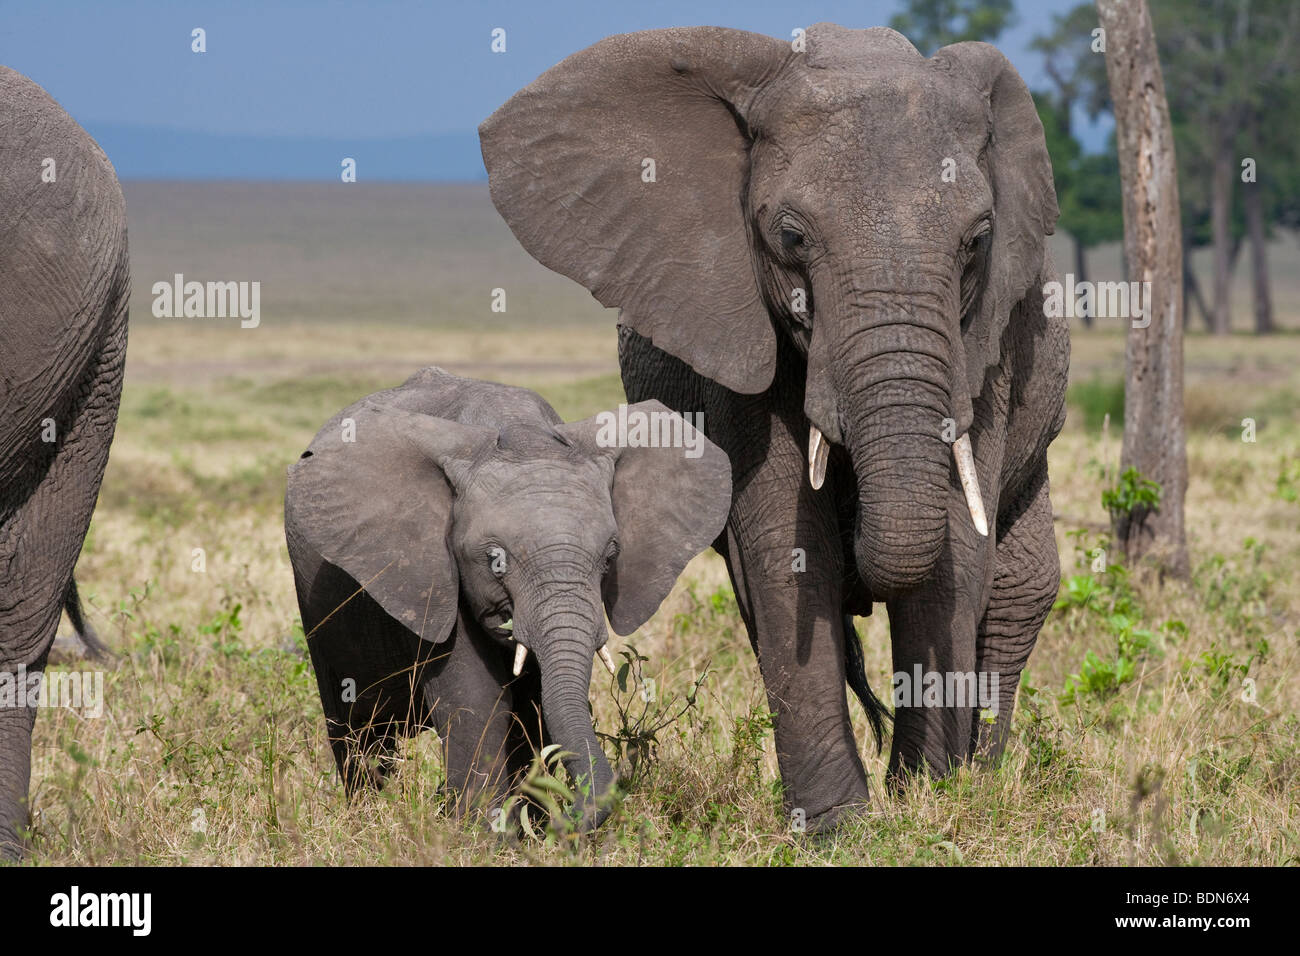 Mother and baby African elephants walking together big ears out through Savanna of Masai Mara Kenya Africa, front light, blue sky, green grass Stock Photo